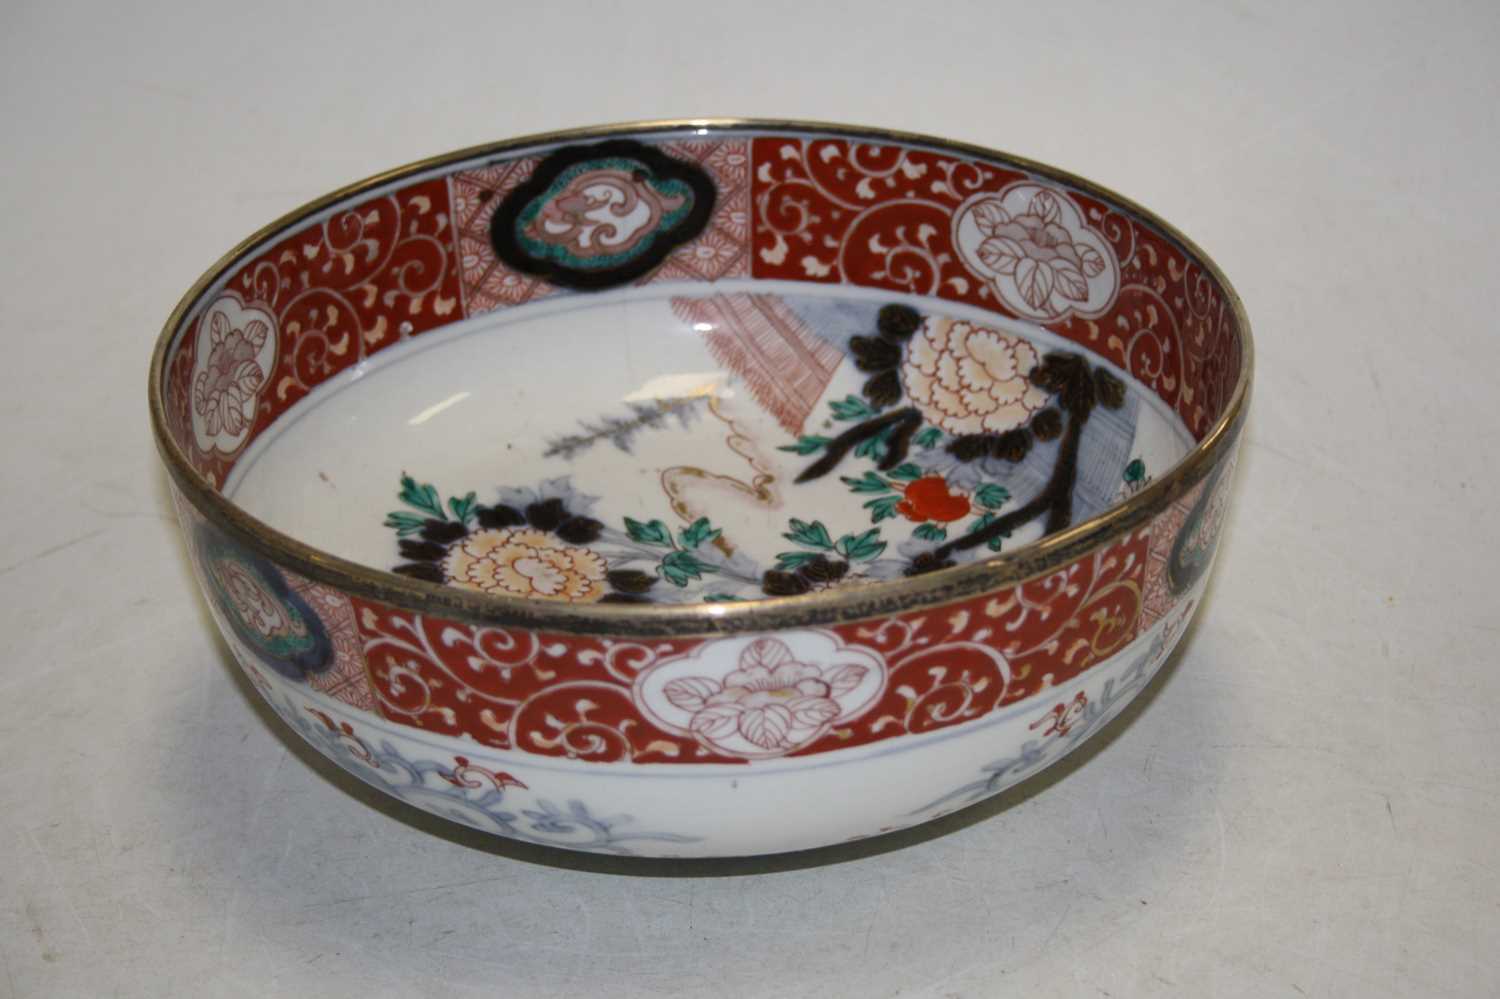 A 19th century bowl, the centre decorated with flowers, in shades of iron red, blue and turquoise, - Image 3 of 5